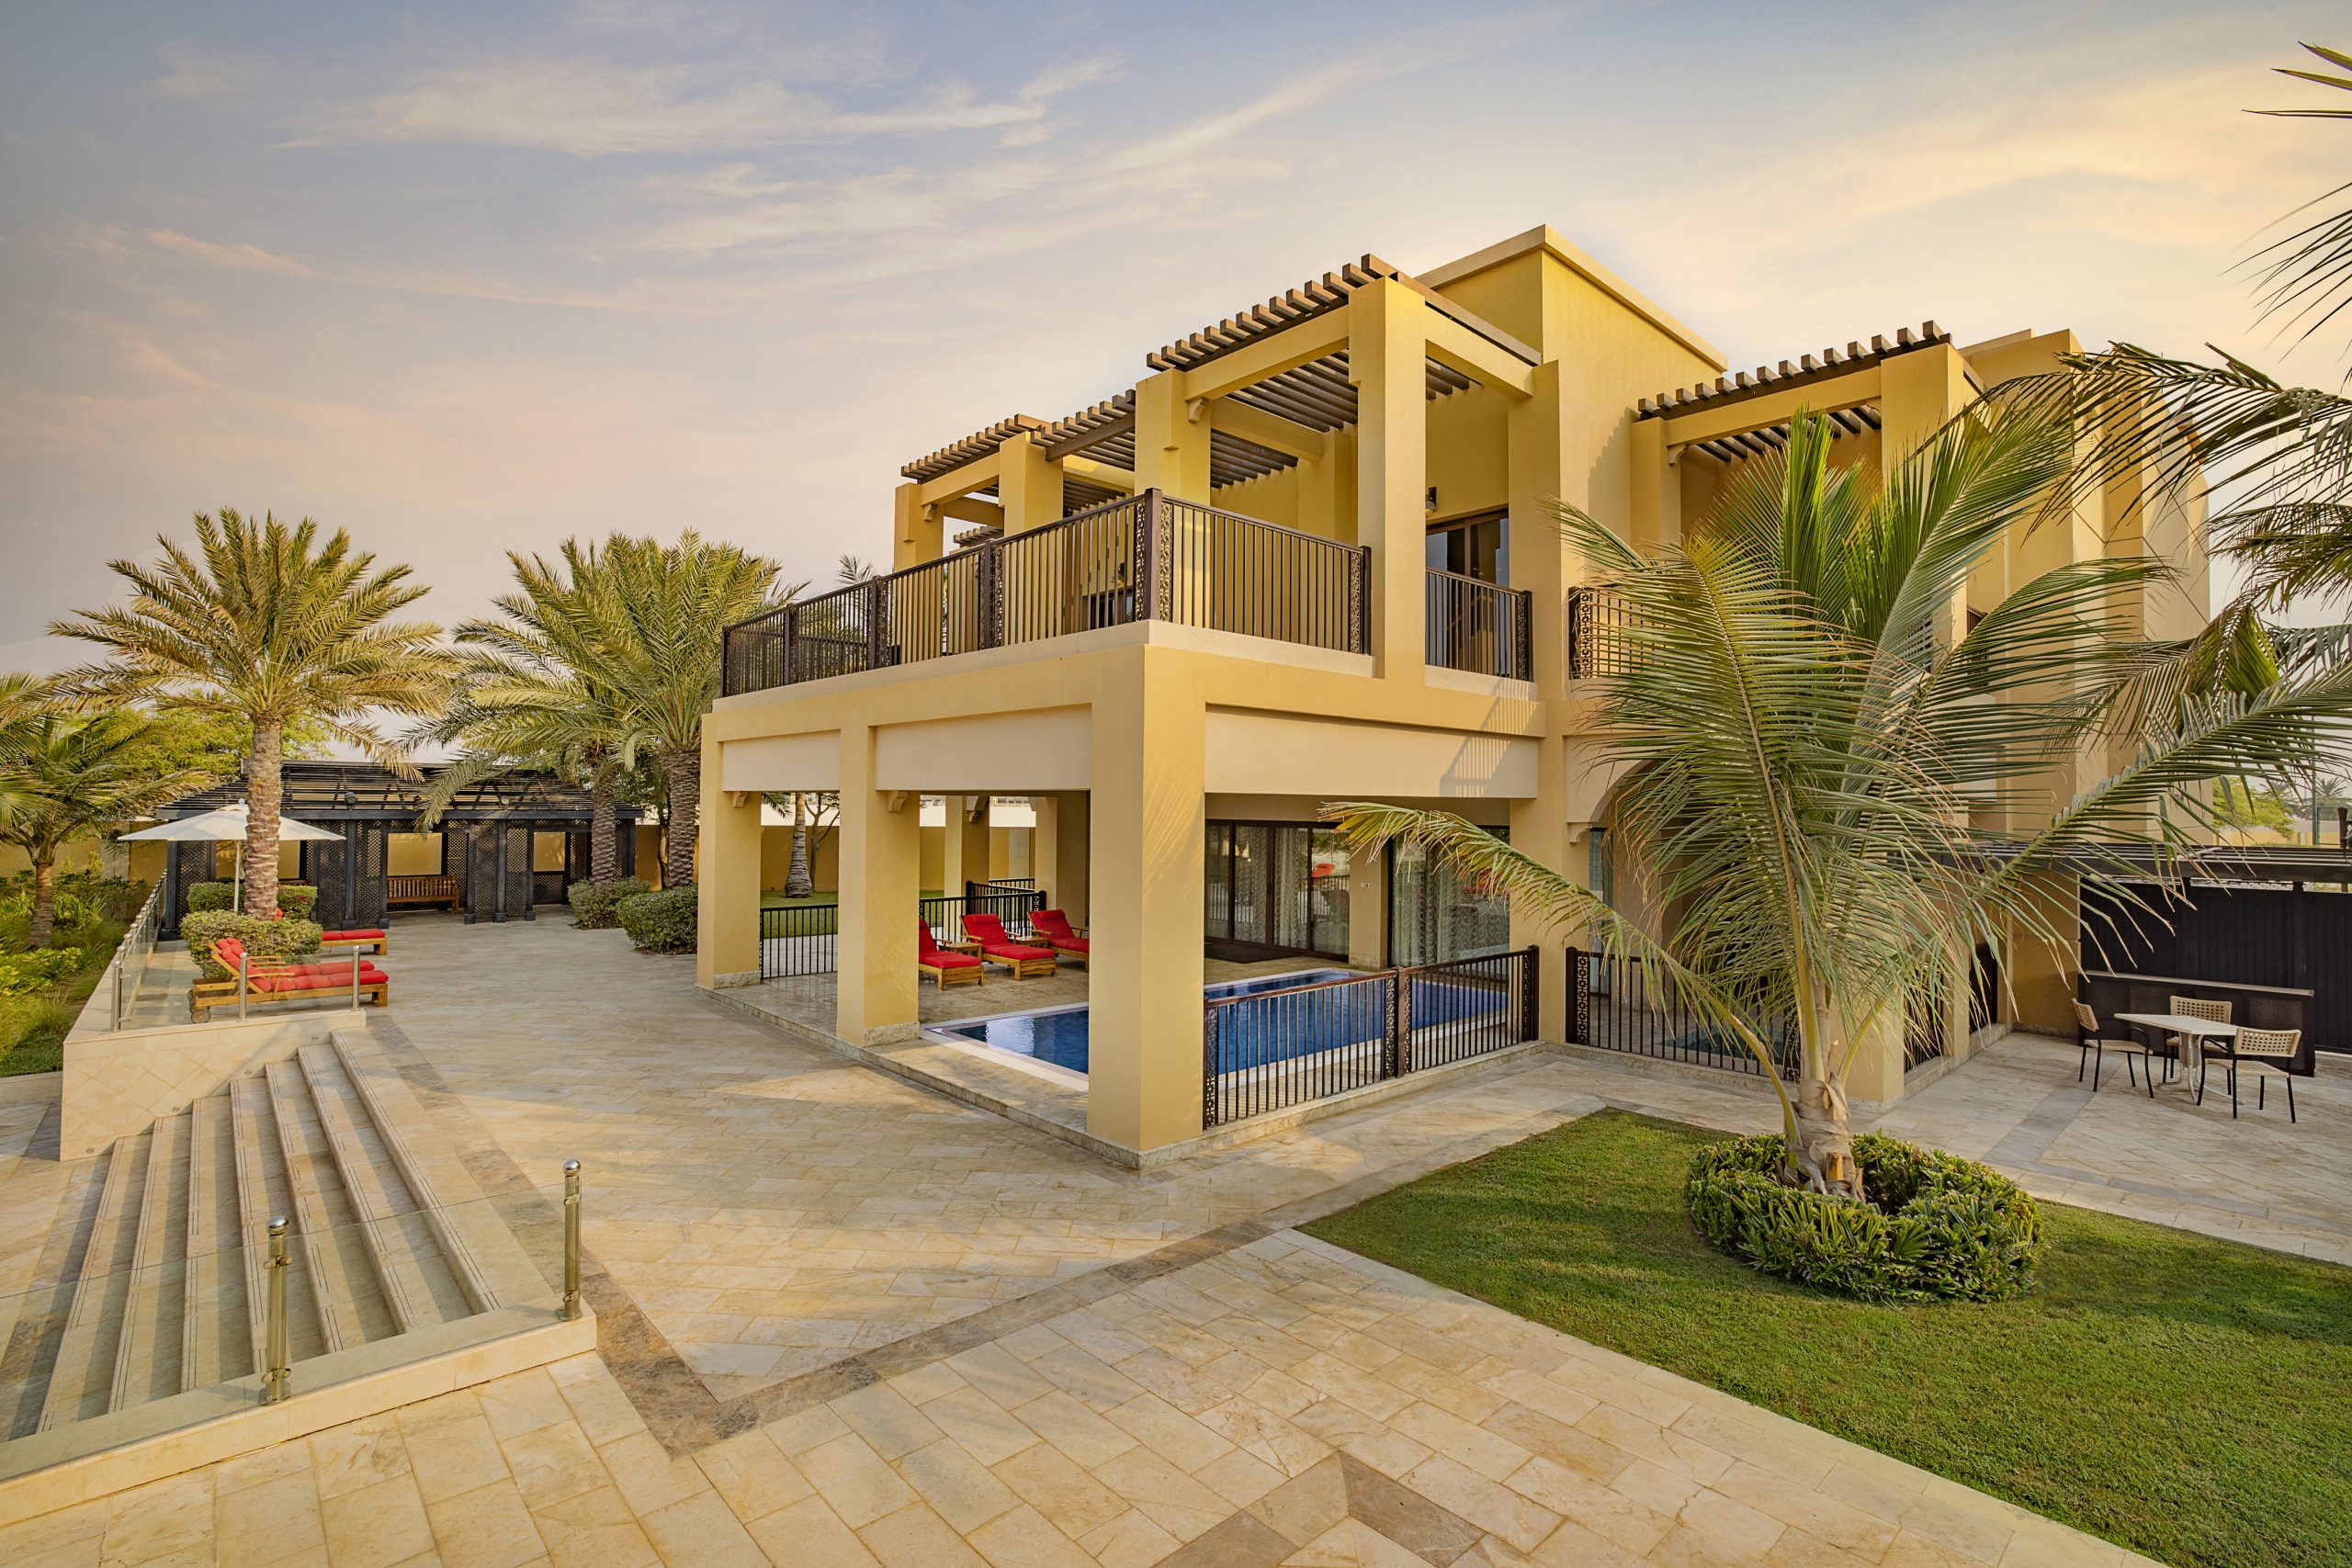 DOUBLETREE BY HILTON RESORT & SPA MARJAN ISLAND LAUNCHES A NEW PRIVATE VILLA